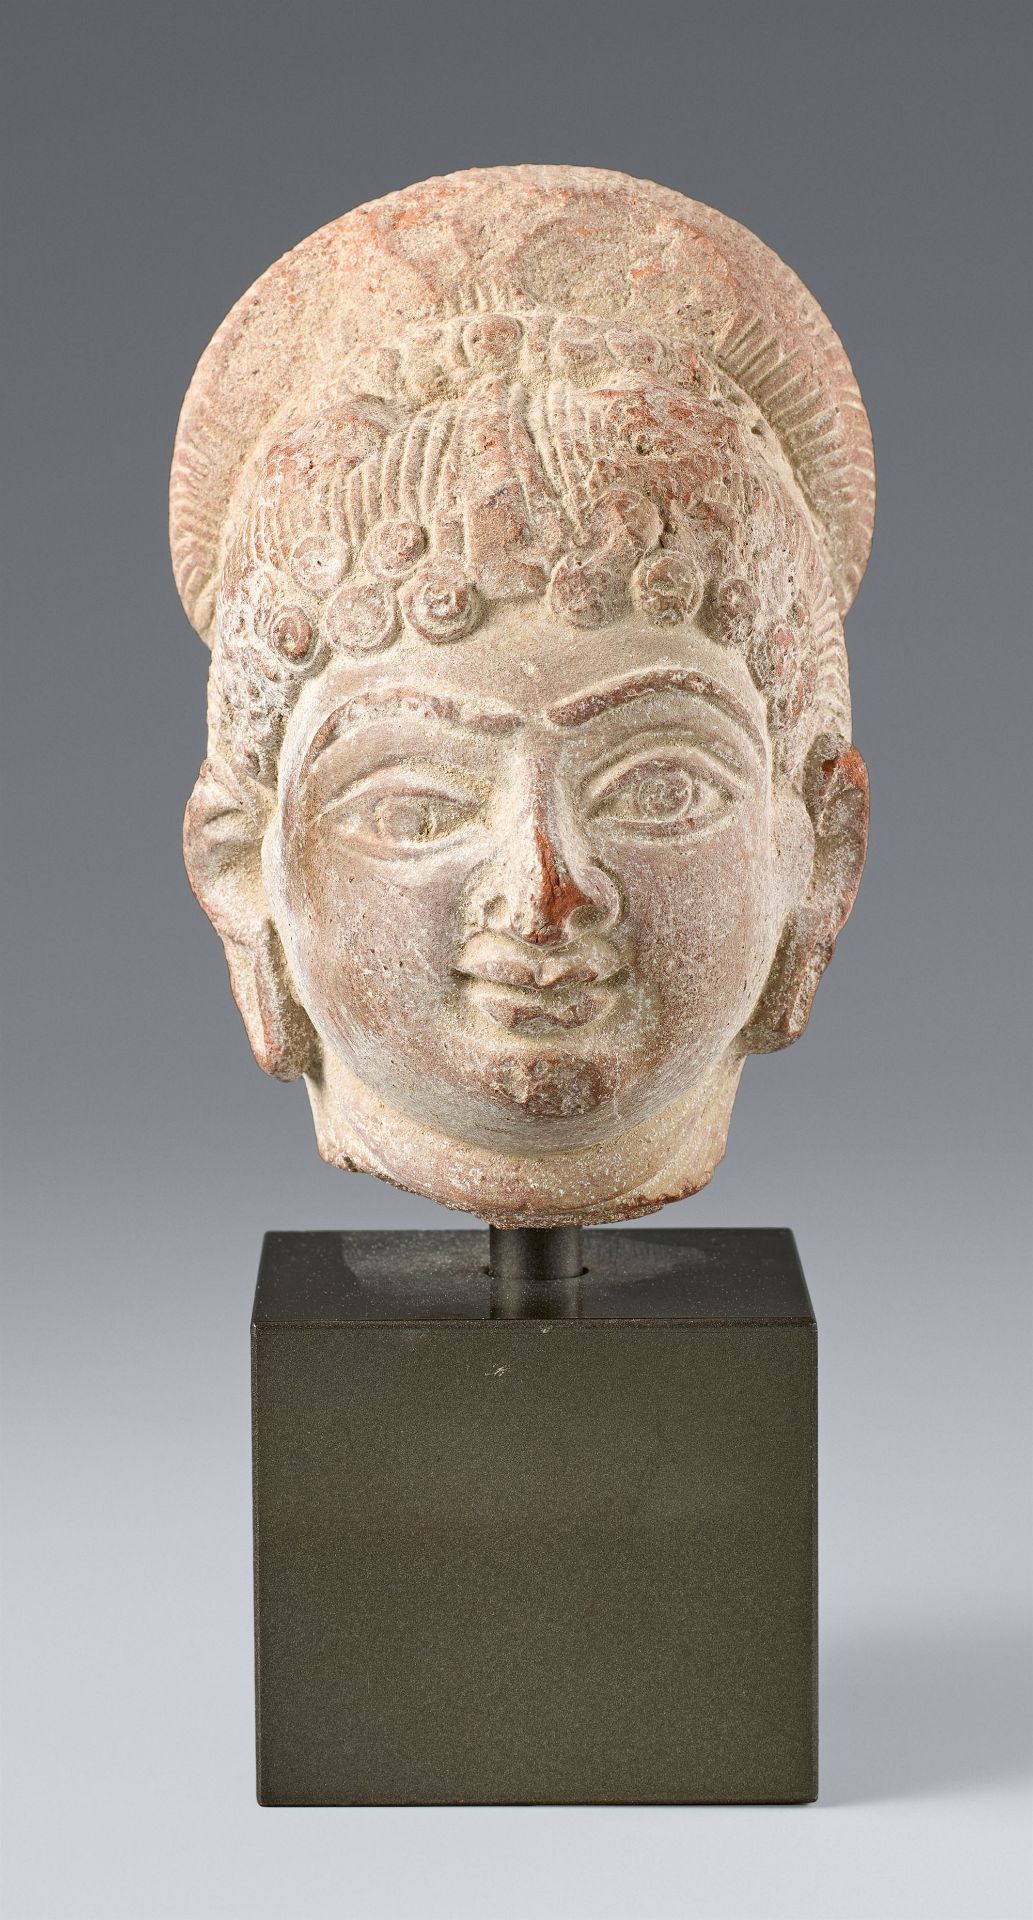 A small red terracotta head of a female. Central India. Possibly Gupta period